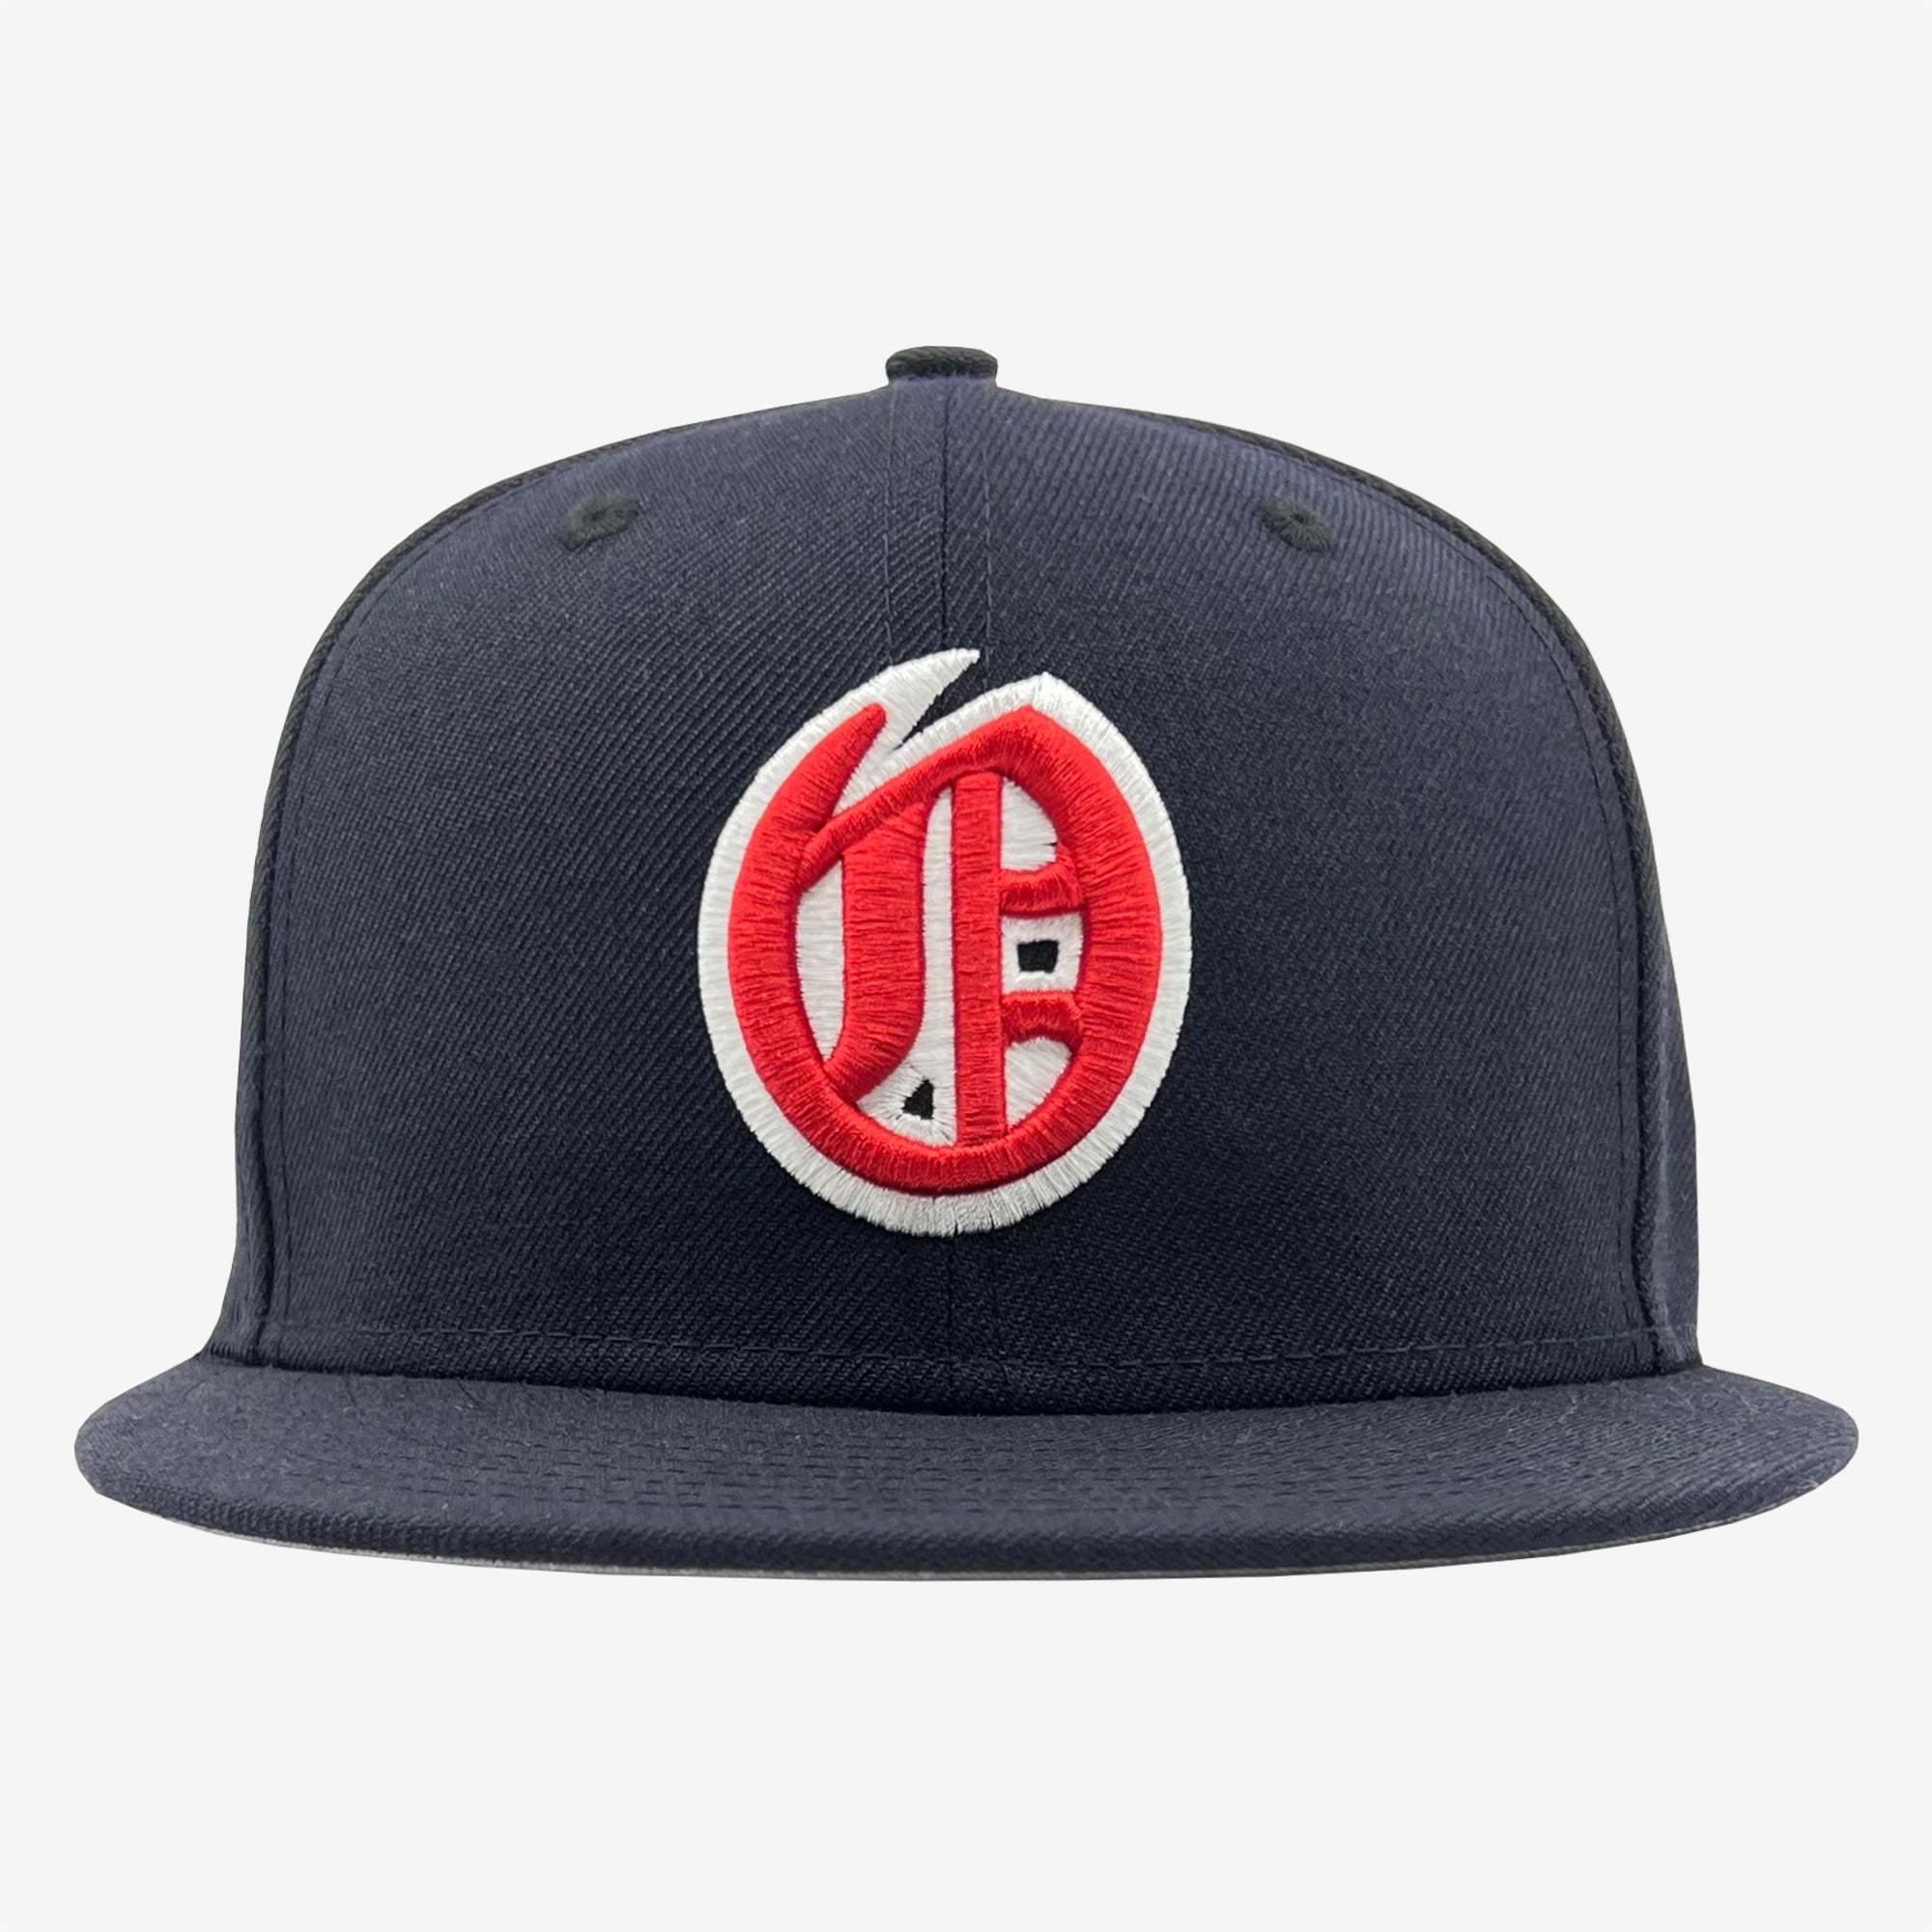 Front view of navy fitted cap with red embroidered Oakland Oaks logo on the crown.